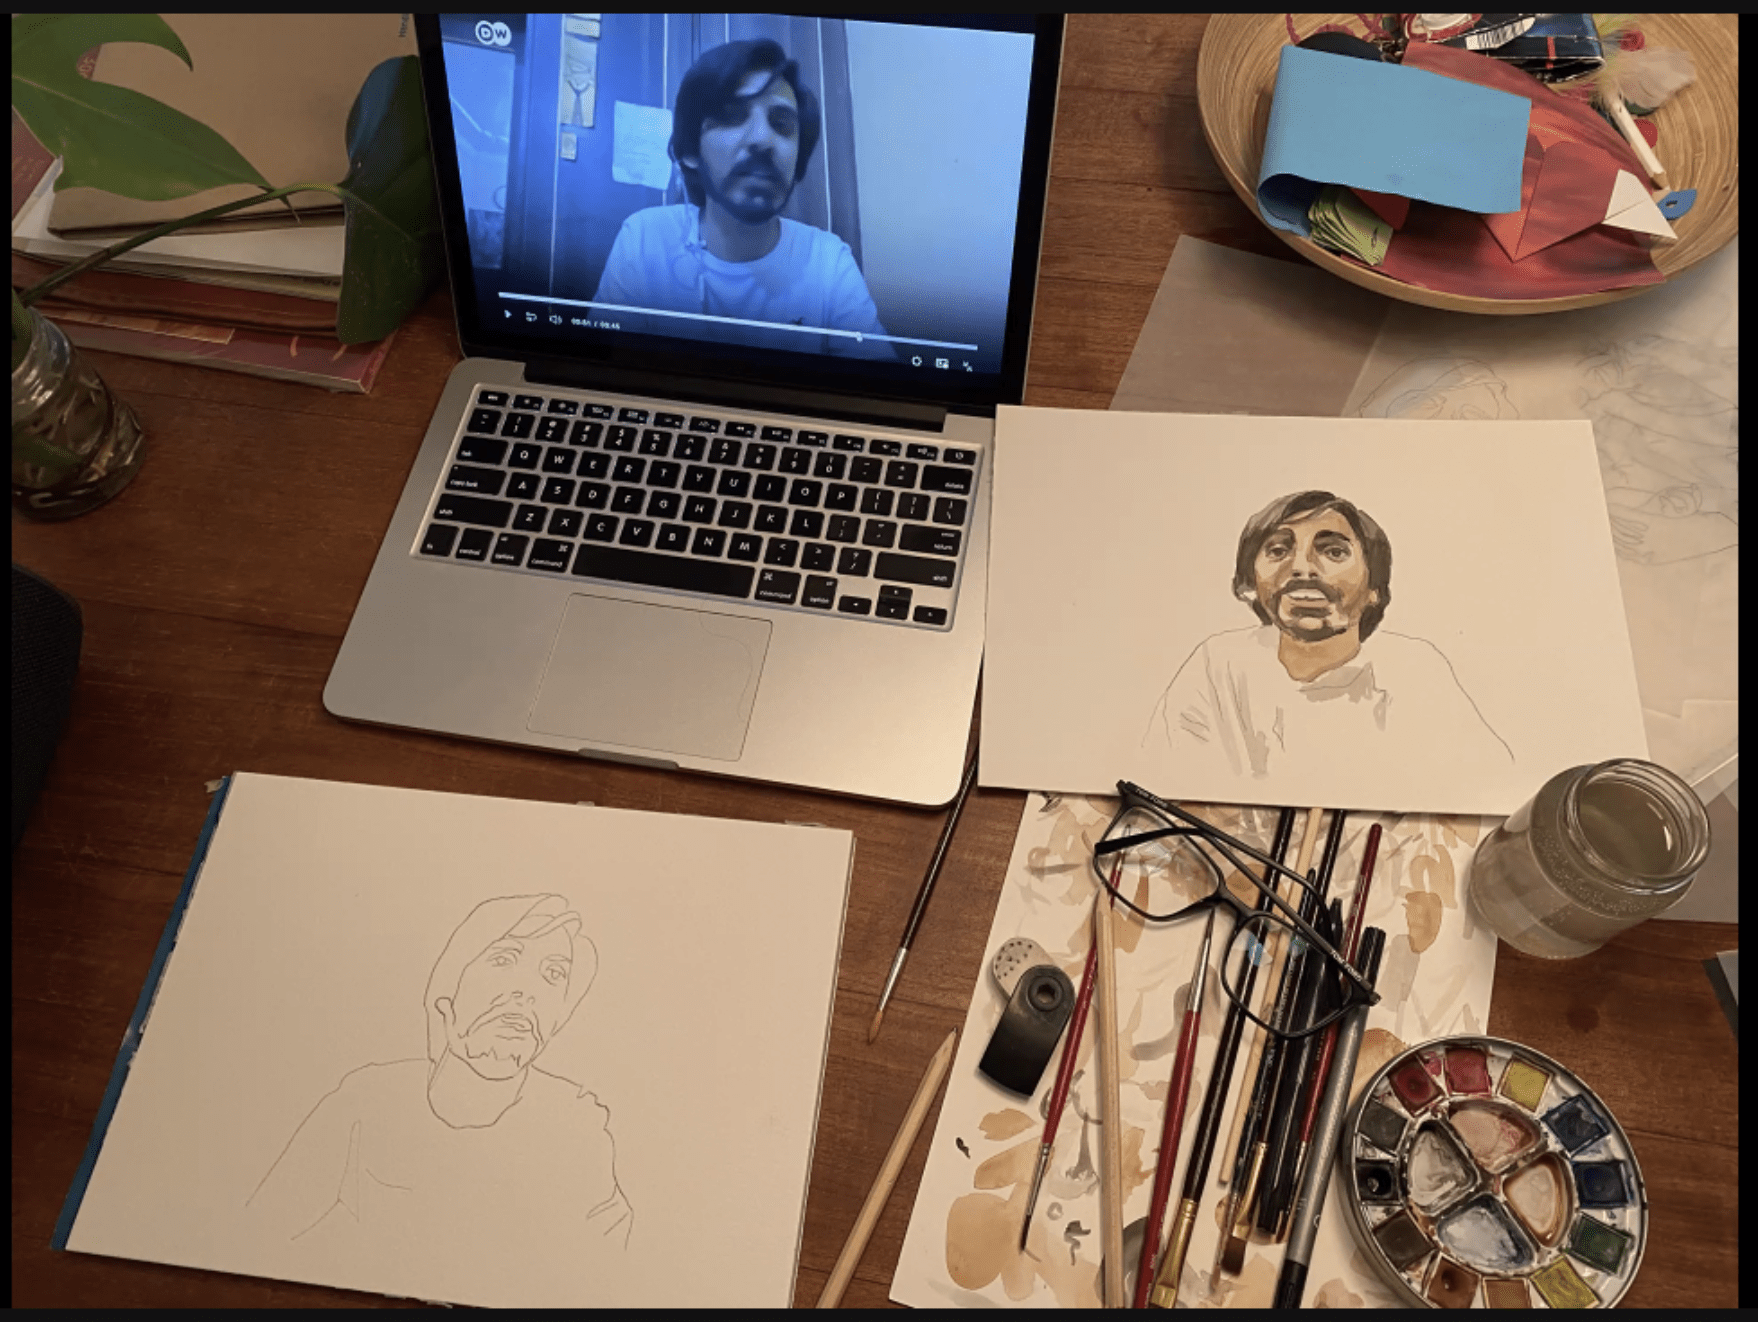 A laptop with a man's face next to a water color portrait of the same man's face.